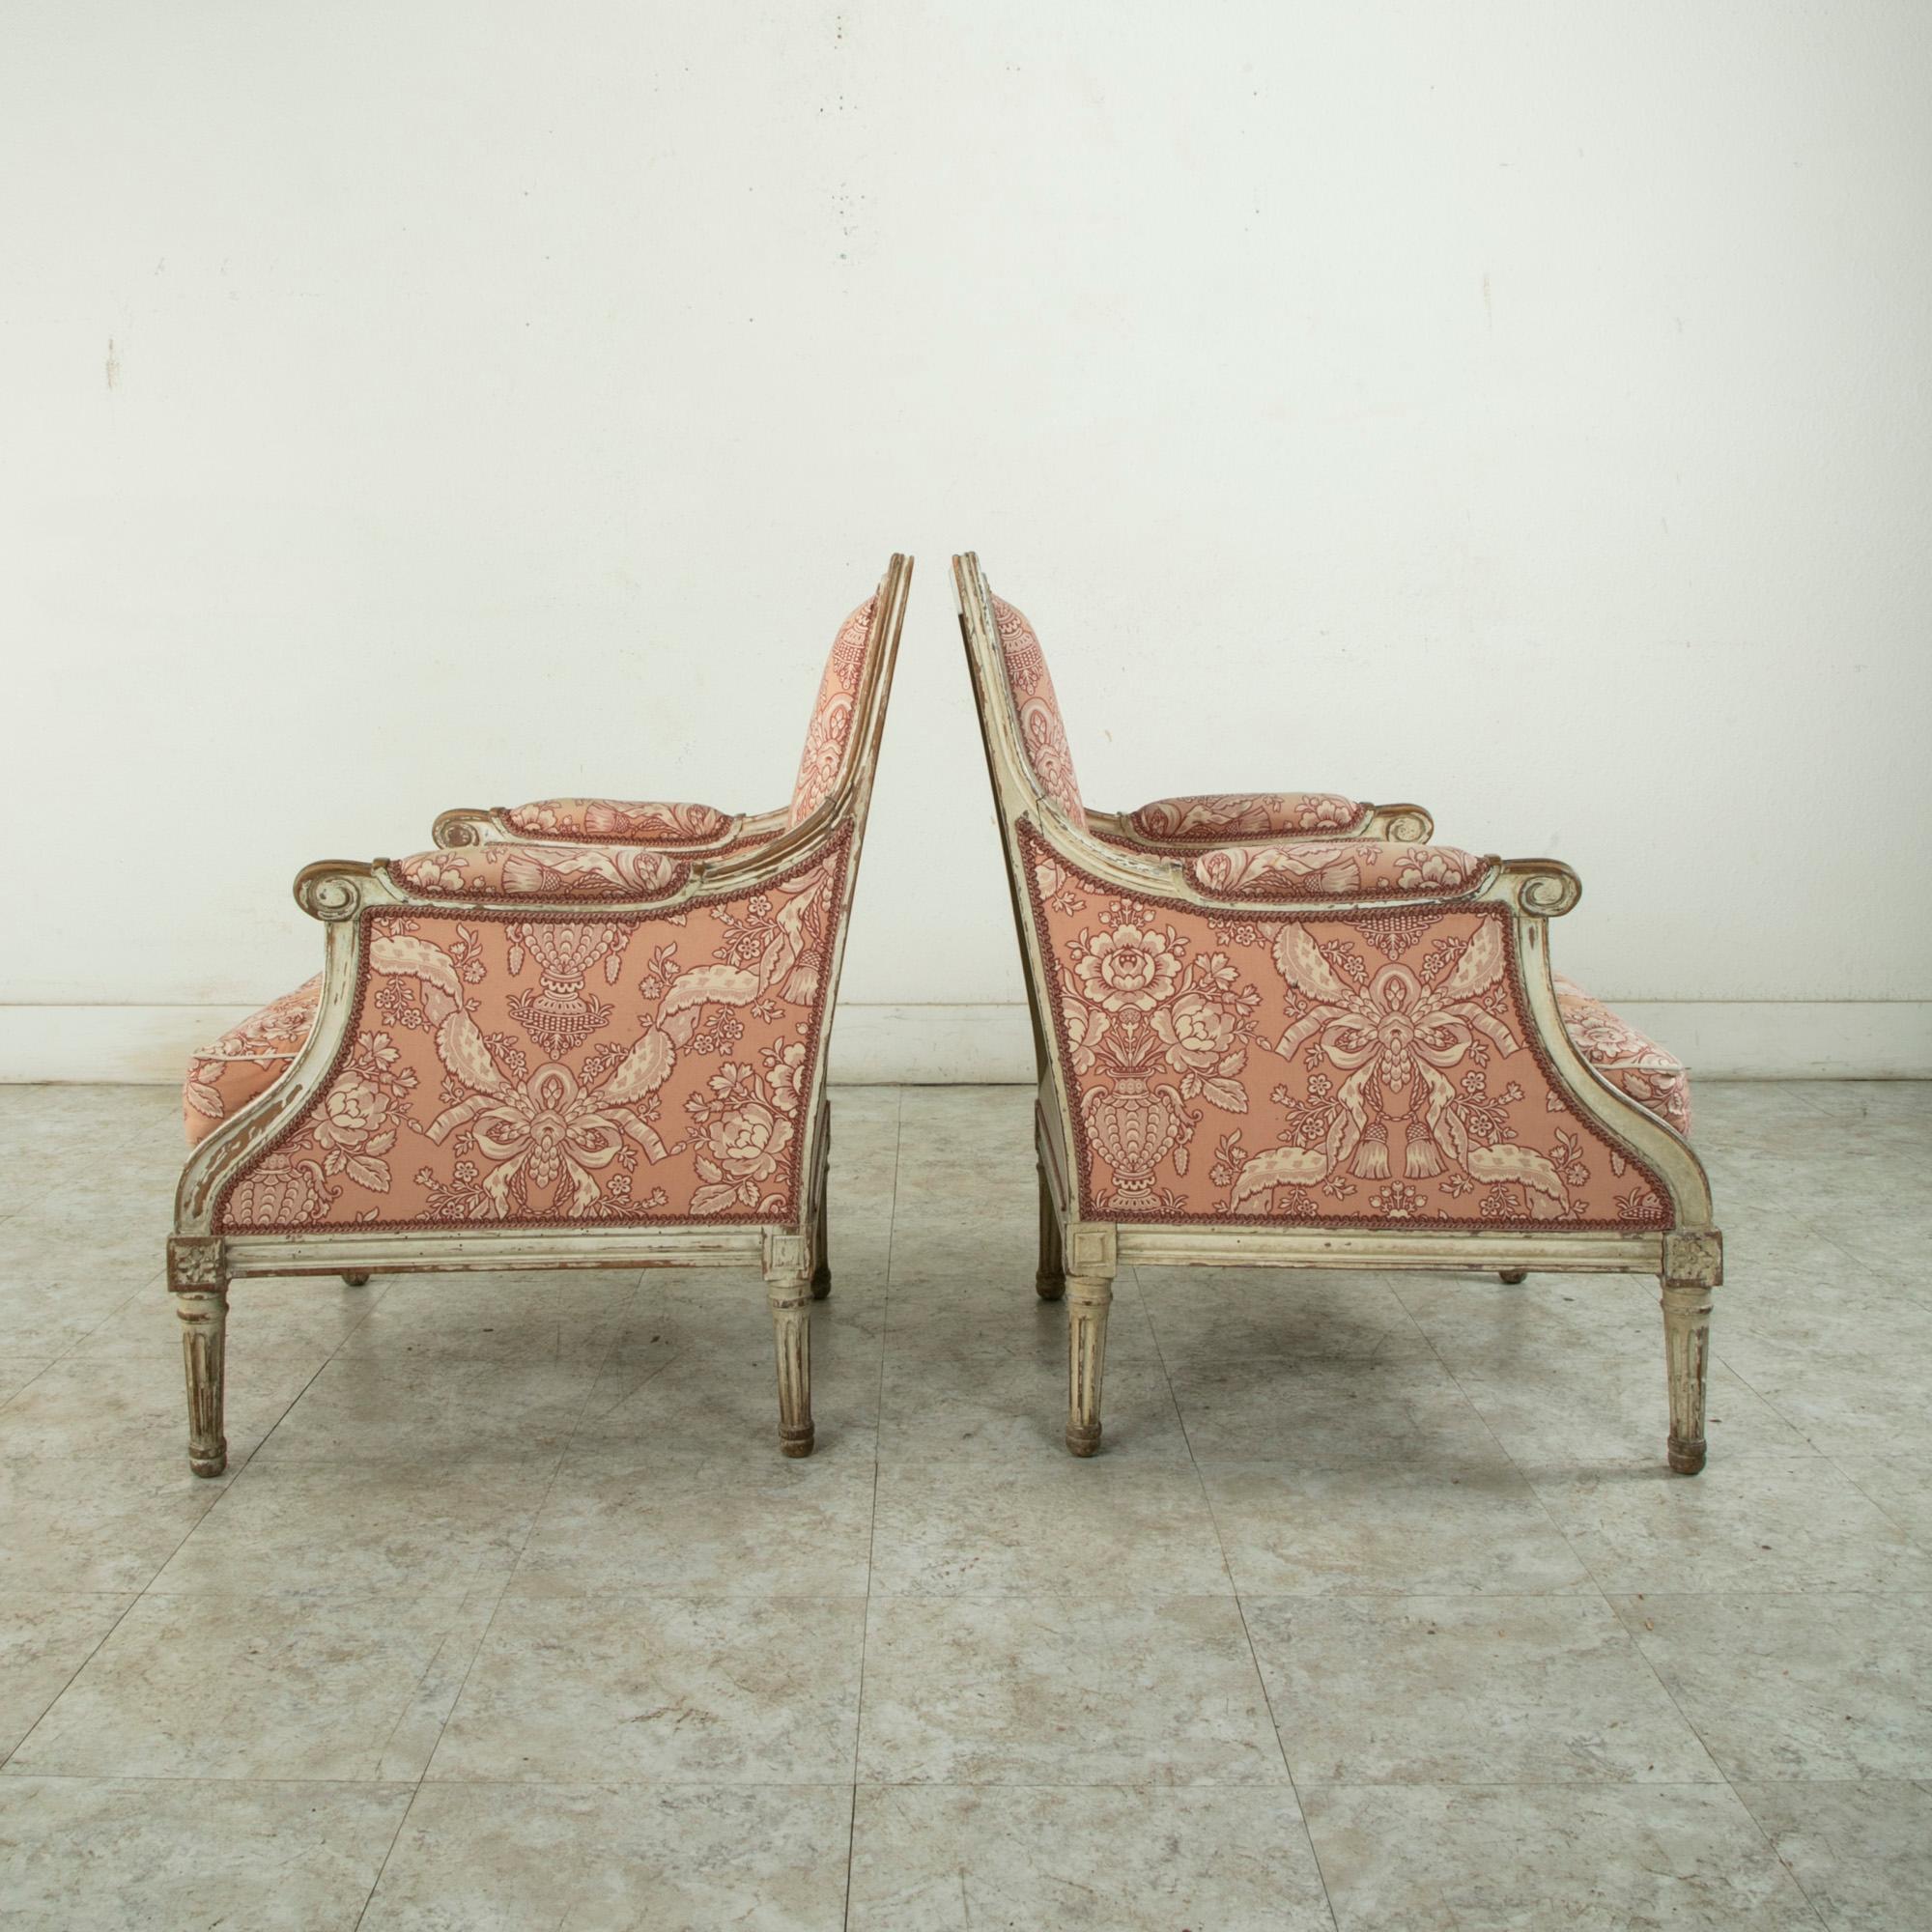 20th Century Pair of Mid-Twentieth Century French Louis XVI Style Painted Armchairs, Bergeres